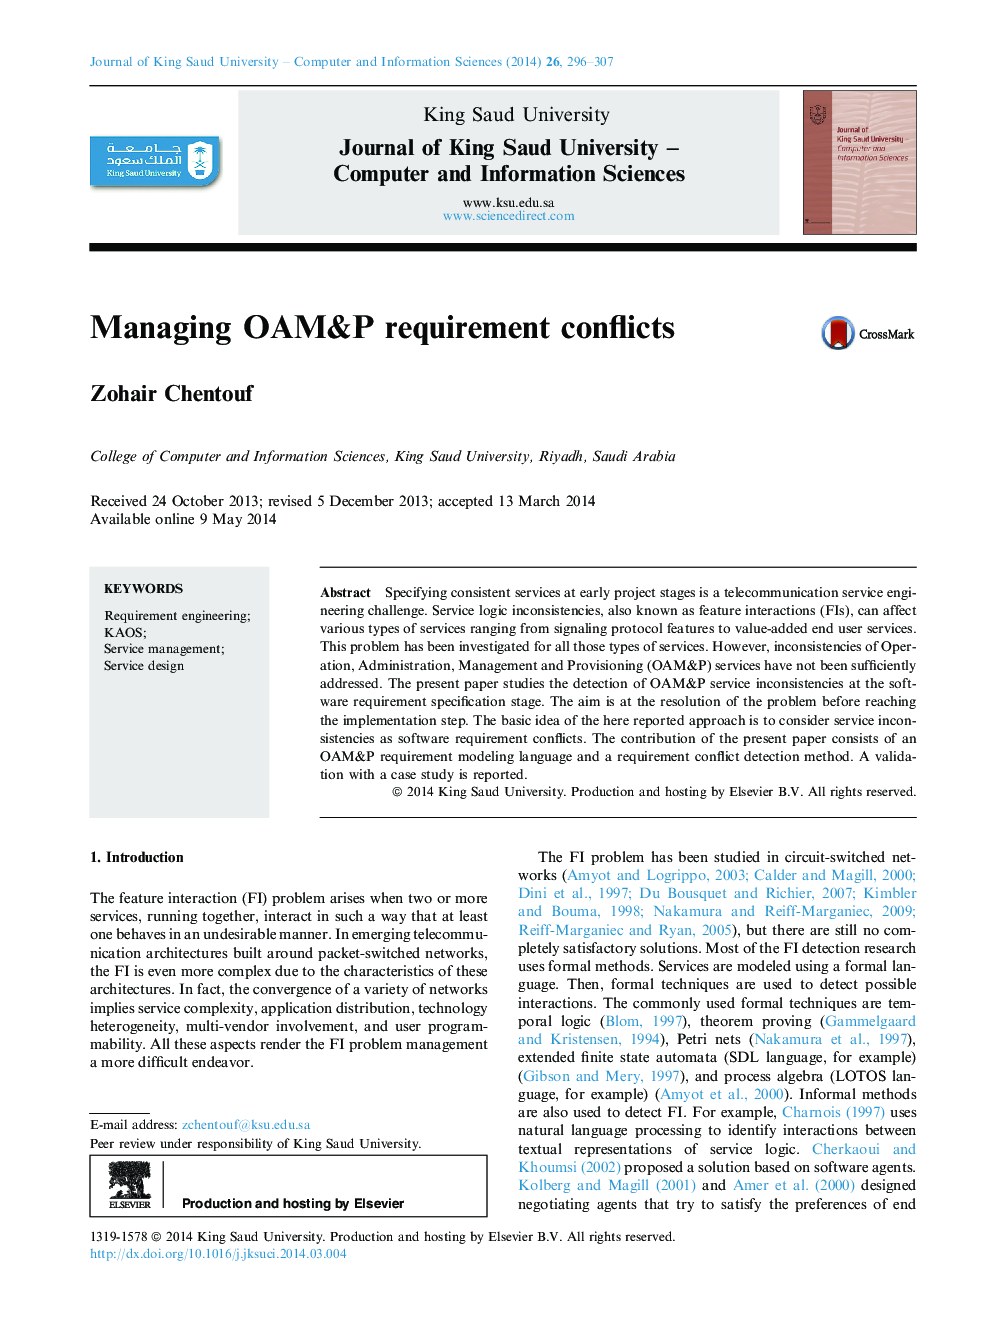 Managing OAM&P requirement conflicts 